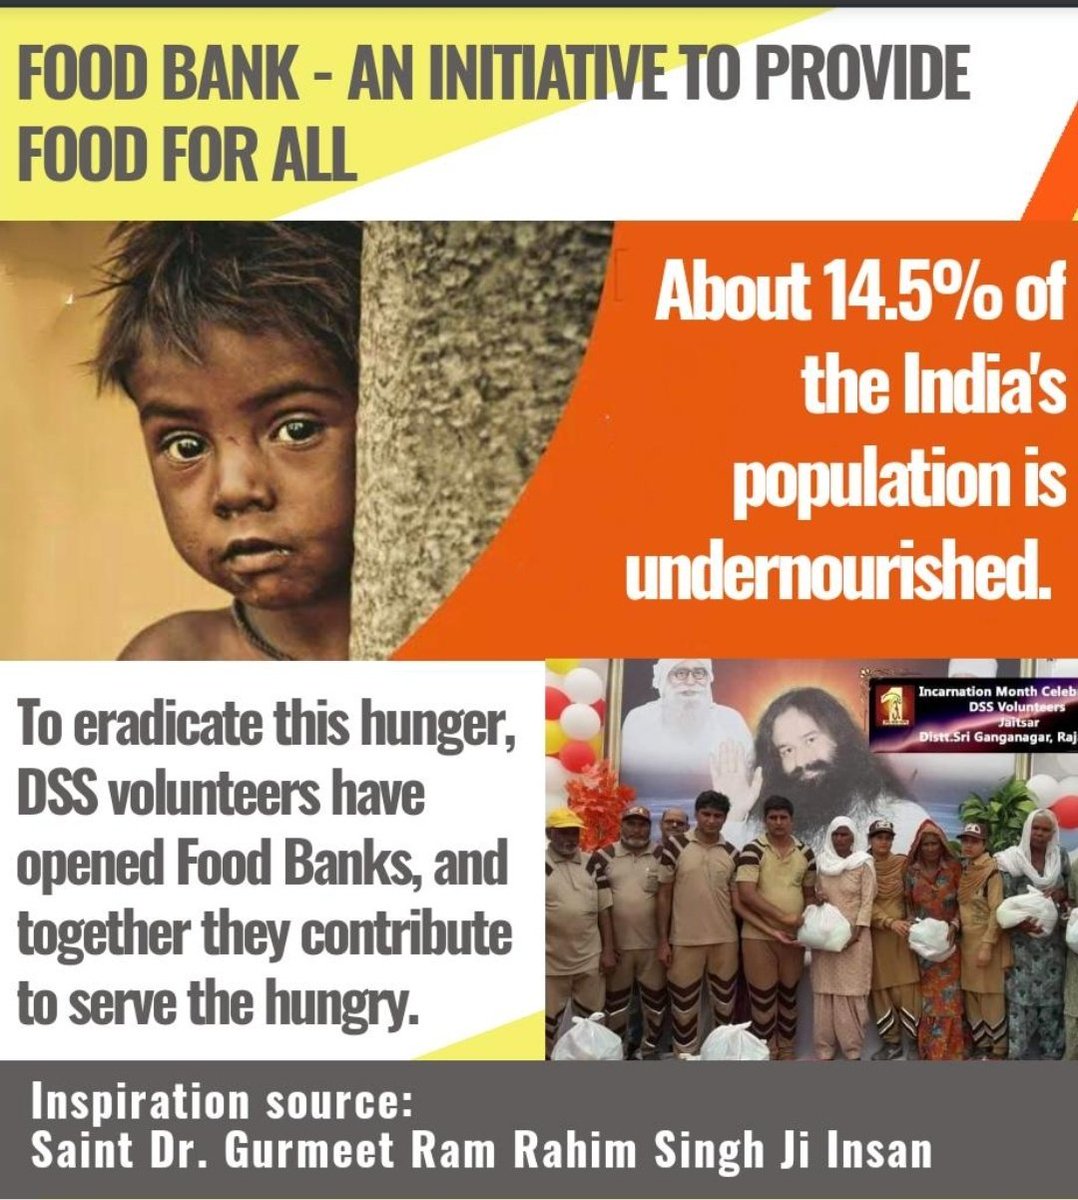 Worldwide,over 800 million people suffer from hunger & chronic nutrient deficiencies. Following the pious guidance of Saint Gurmeet Ram Rahim ji,DSS volunteers provide ration kits to the needy people & actively contribute to hunger eradication.
#FoodForAll